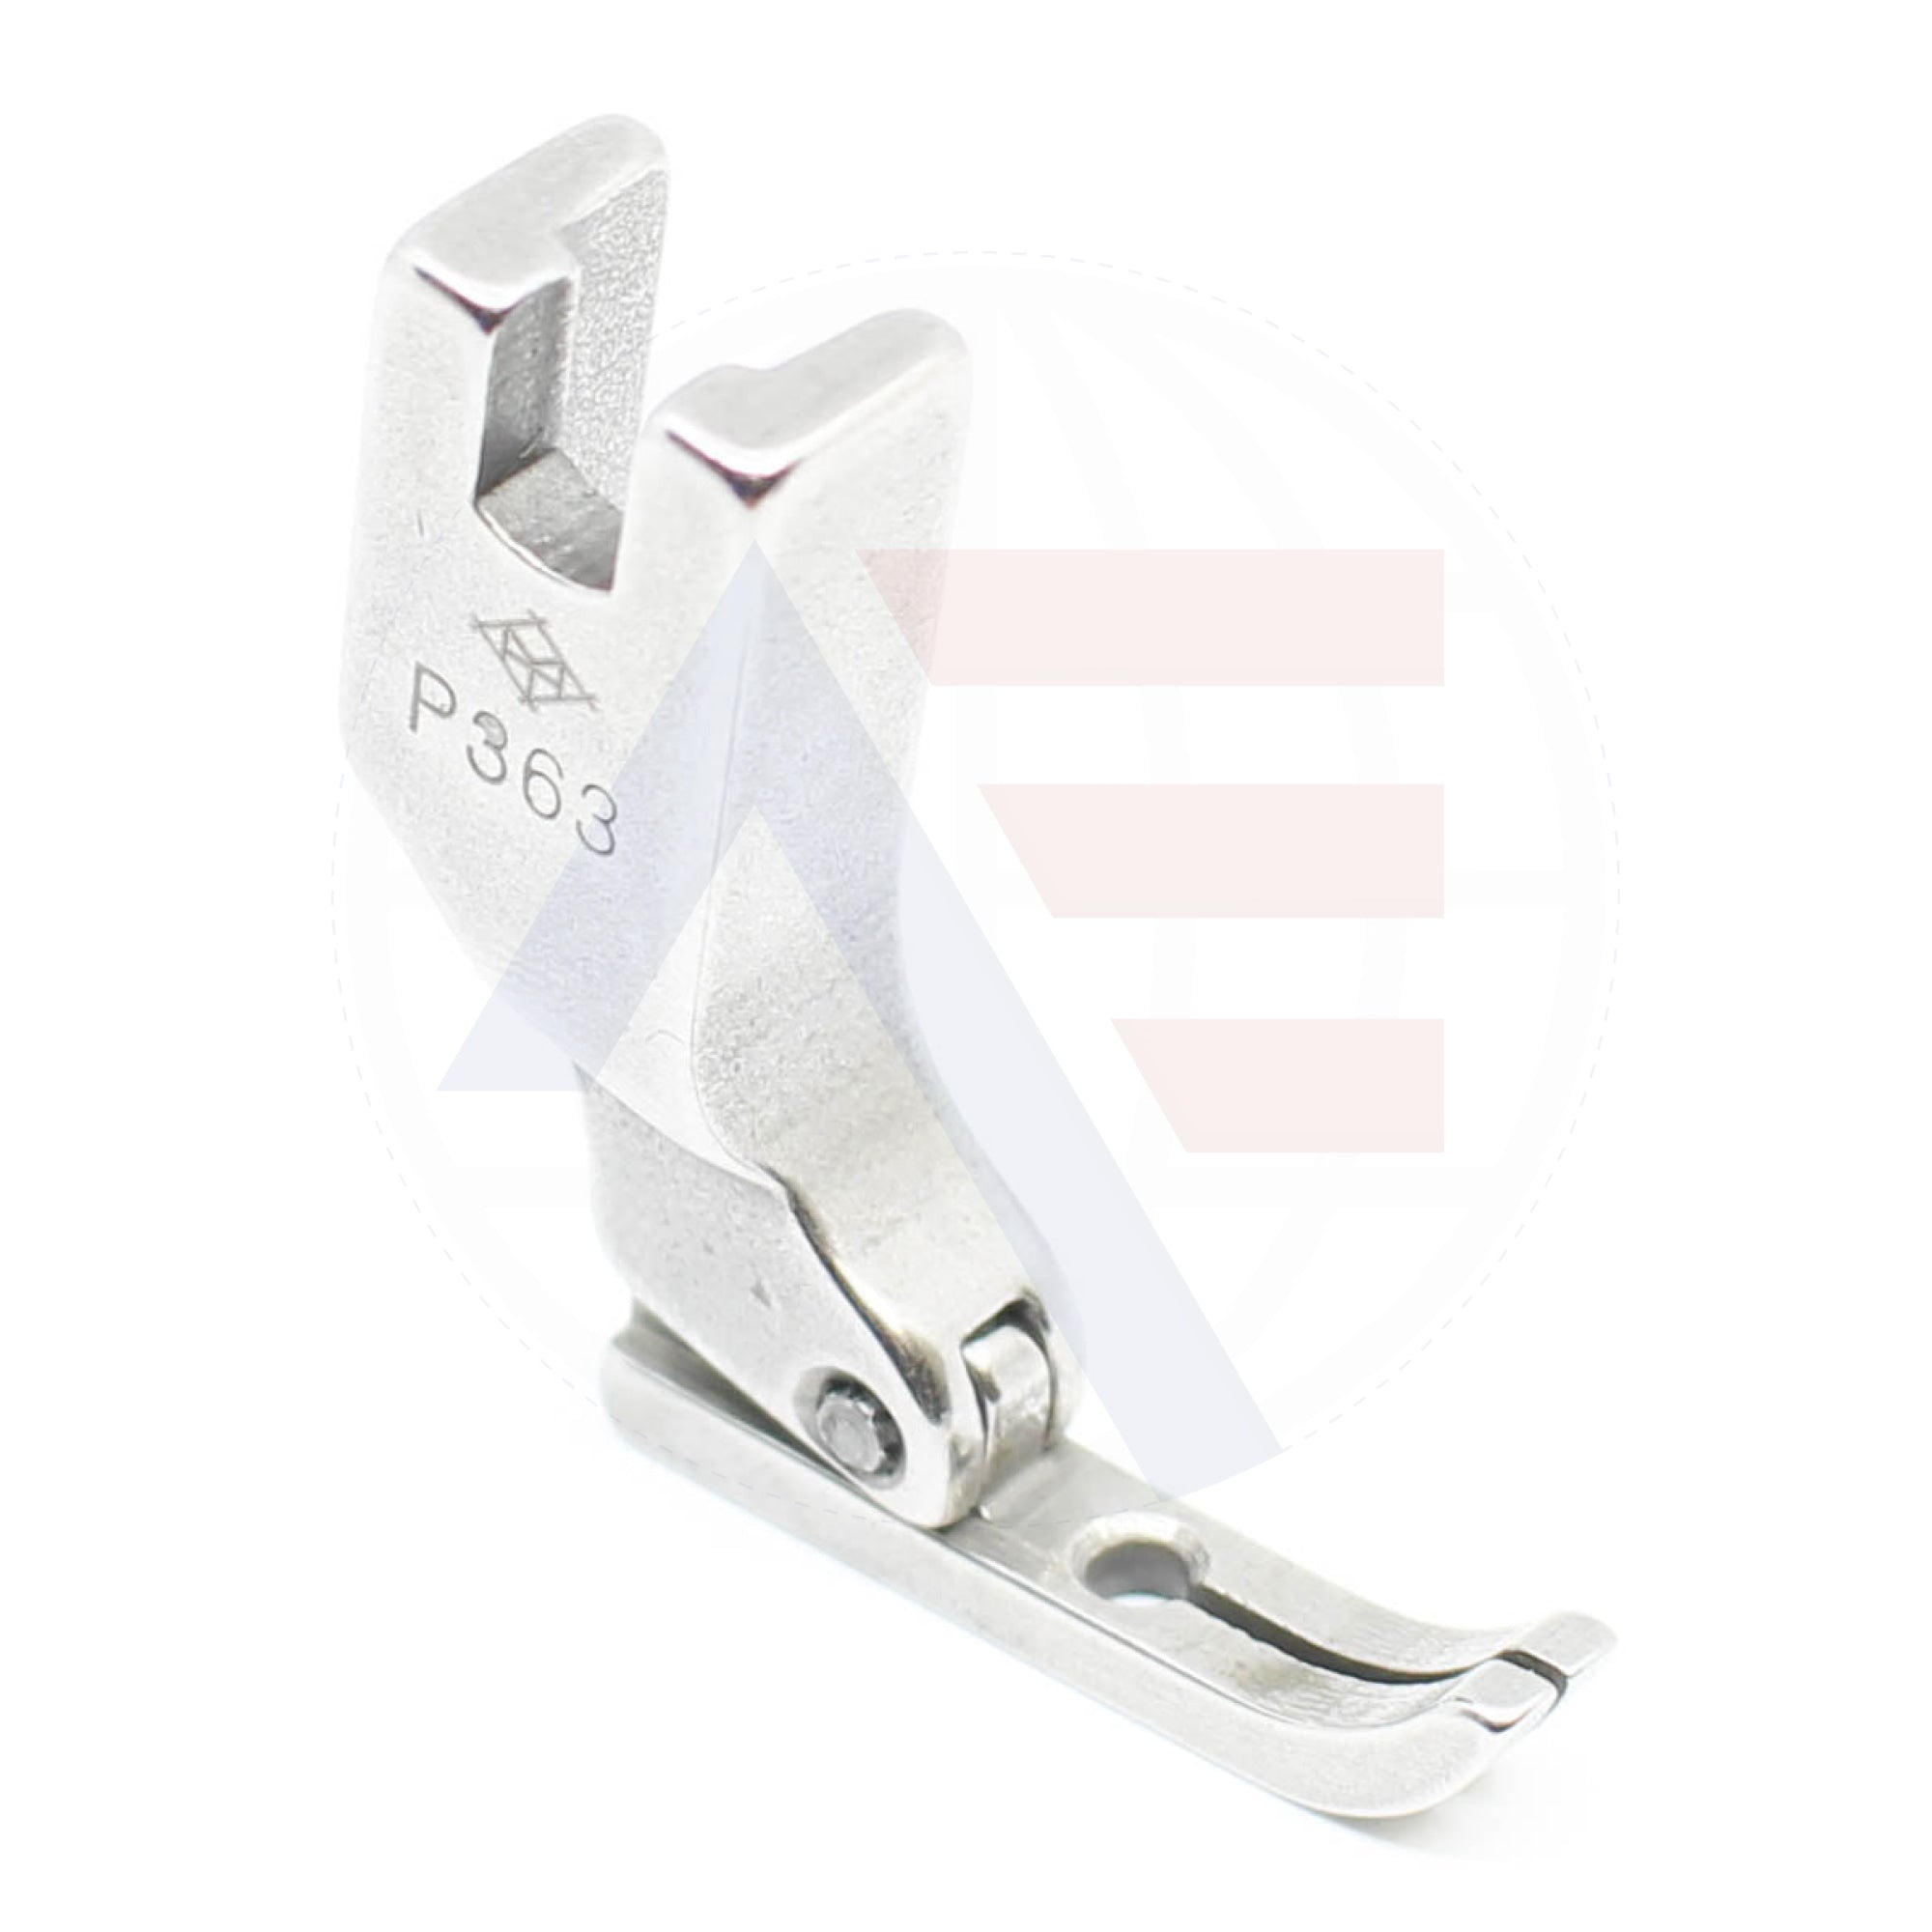 P363 Zip Foot Sewing Machine Spare Parts